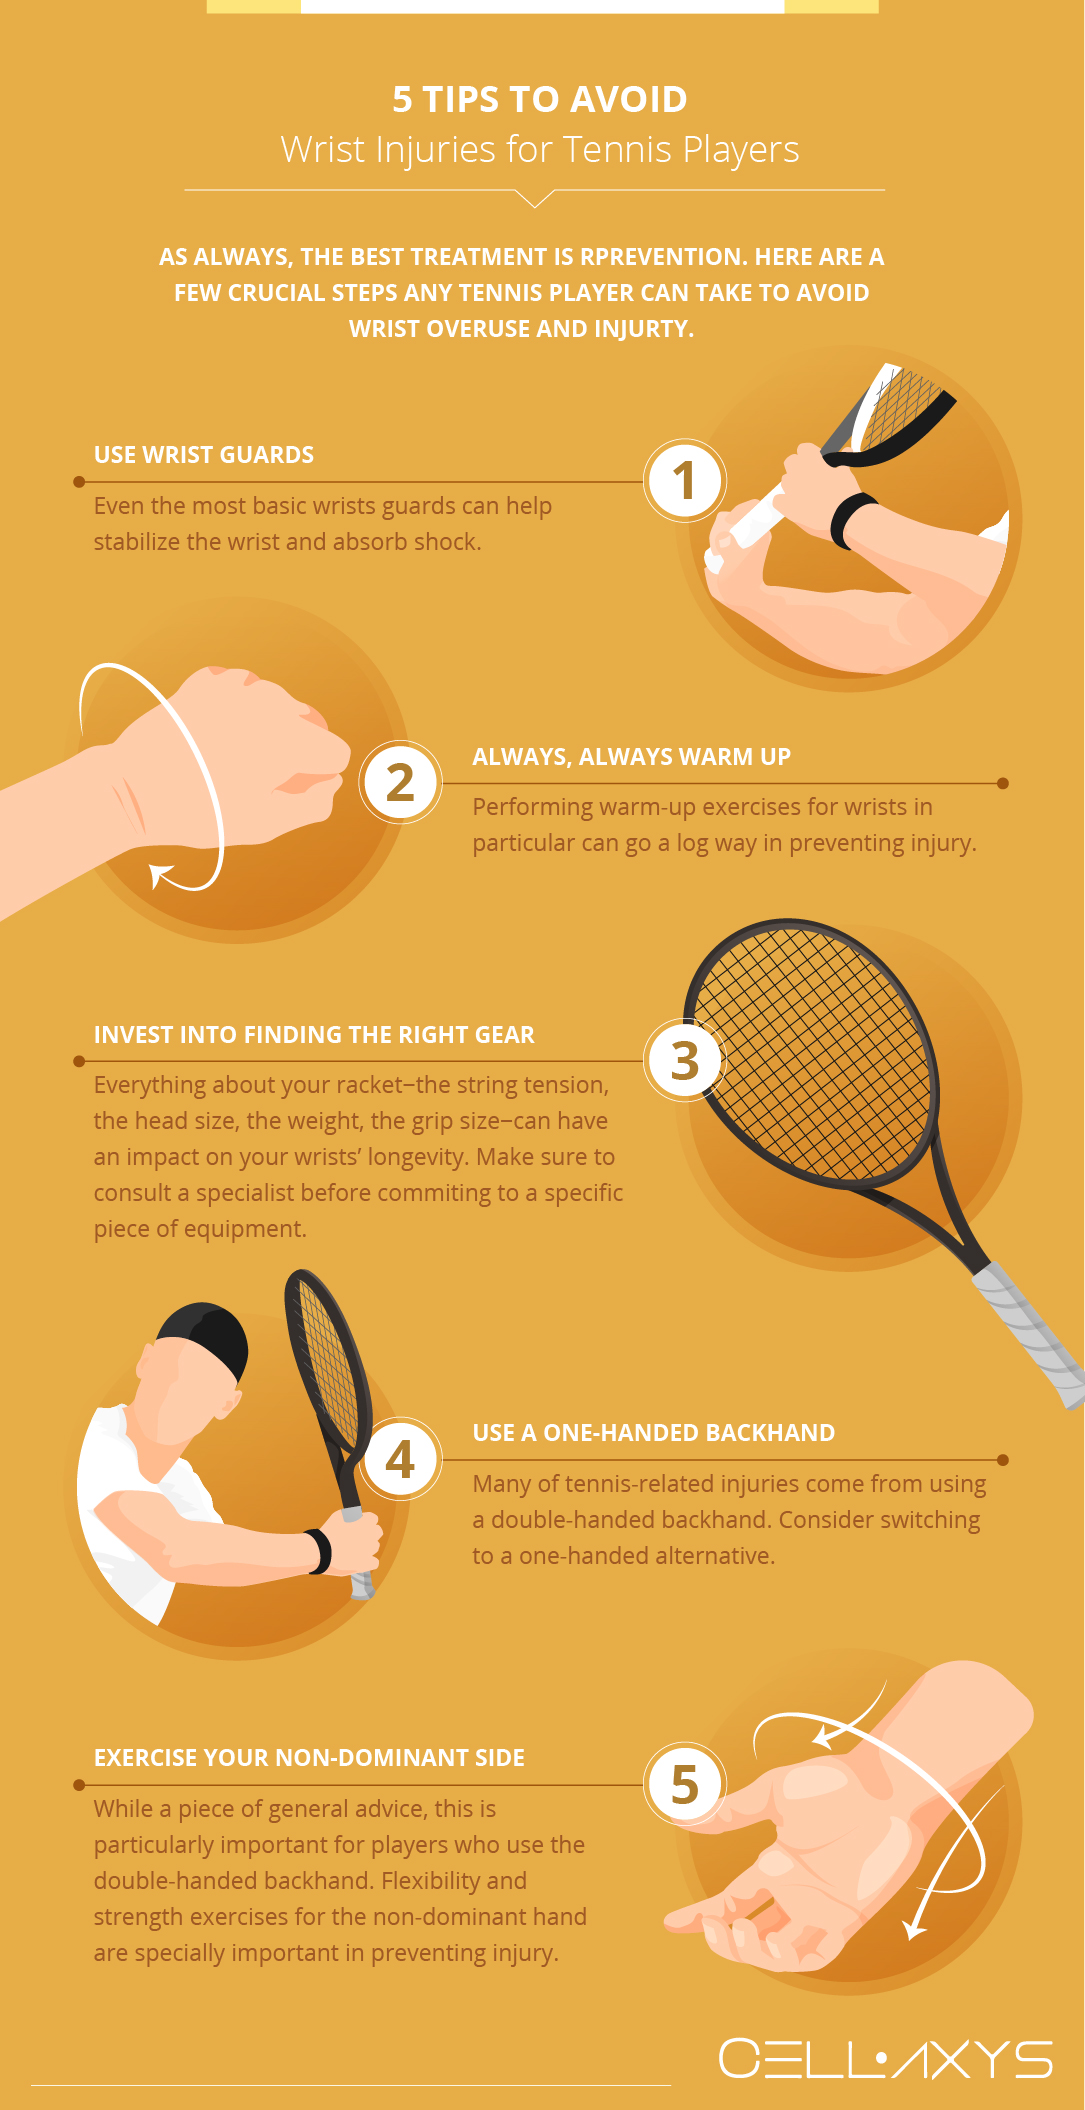 Tips to Avoid Wrist Injuries for Tennis Players